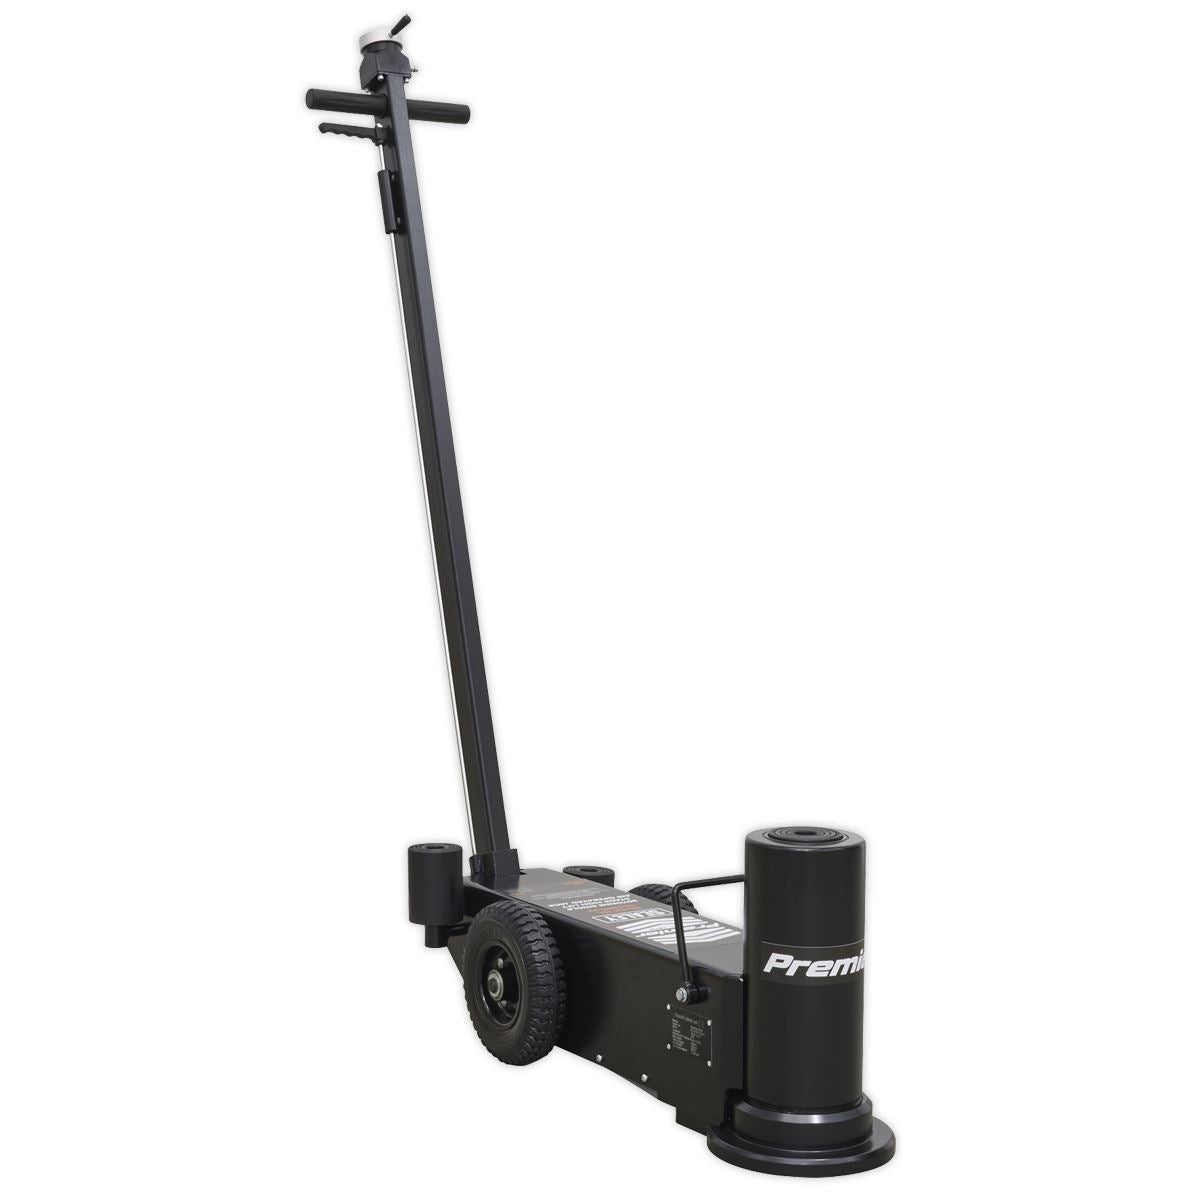 Sealey Premier Premier Air Operated High Lift Single Stage Jack 30 Tonne